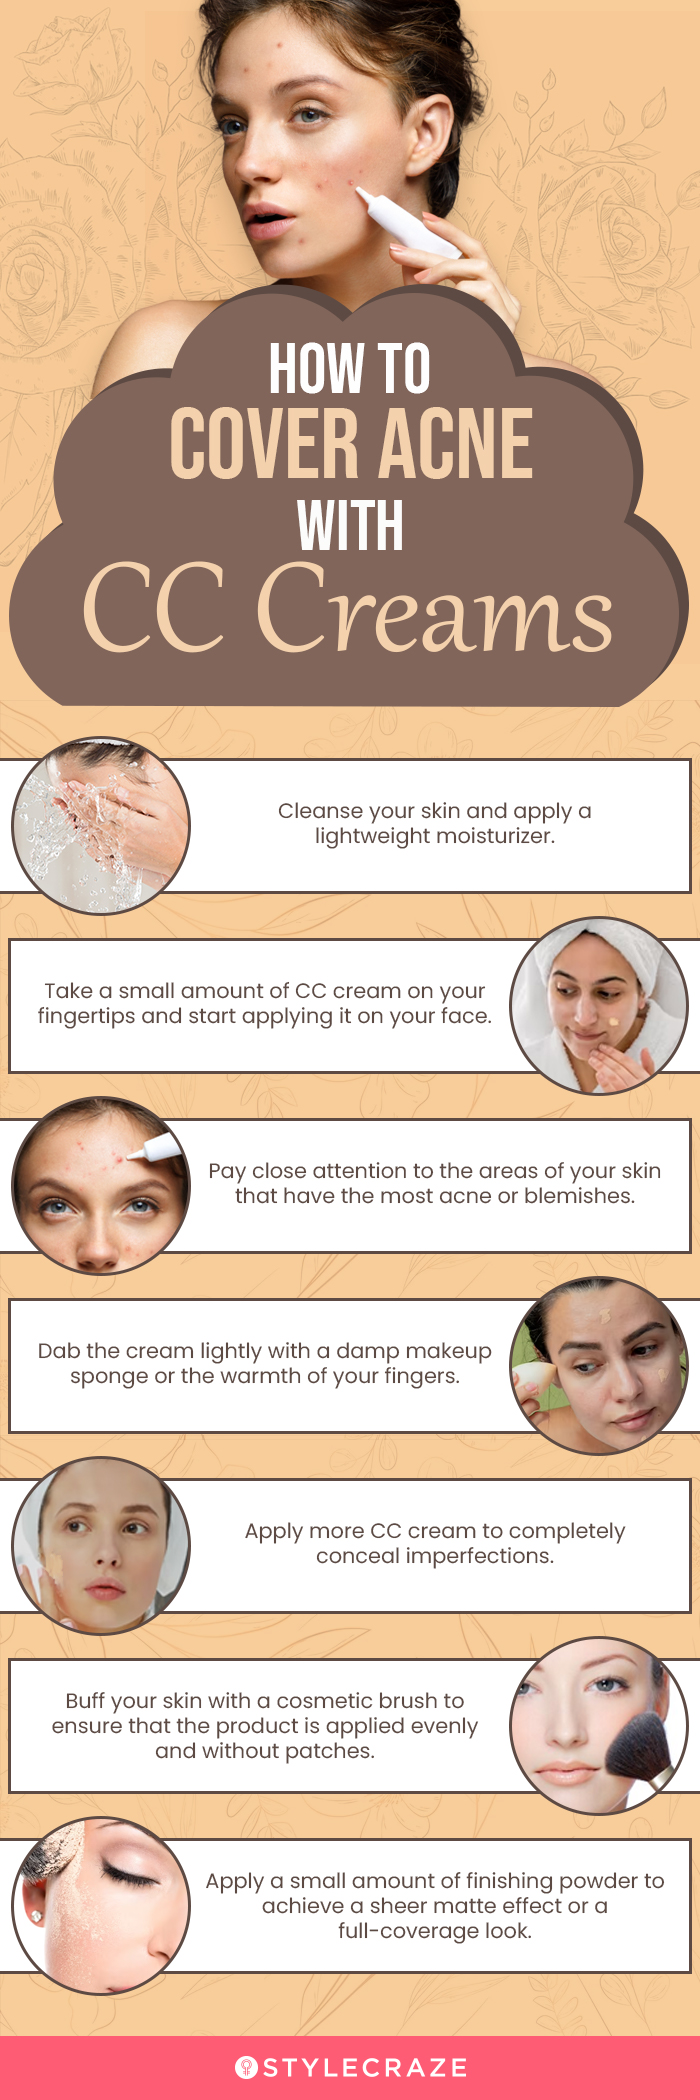 How to Cover Acne with CC Cream (infographic)